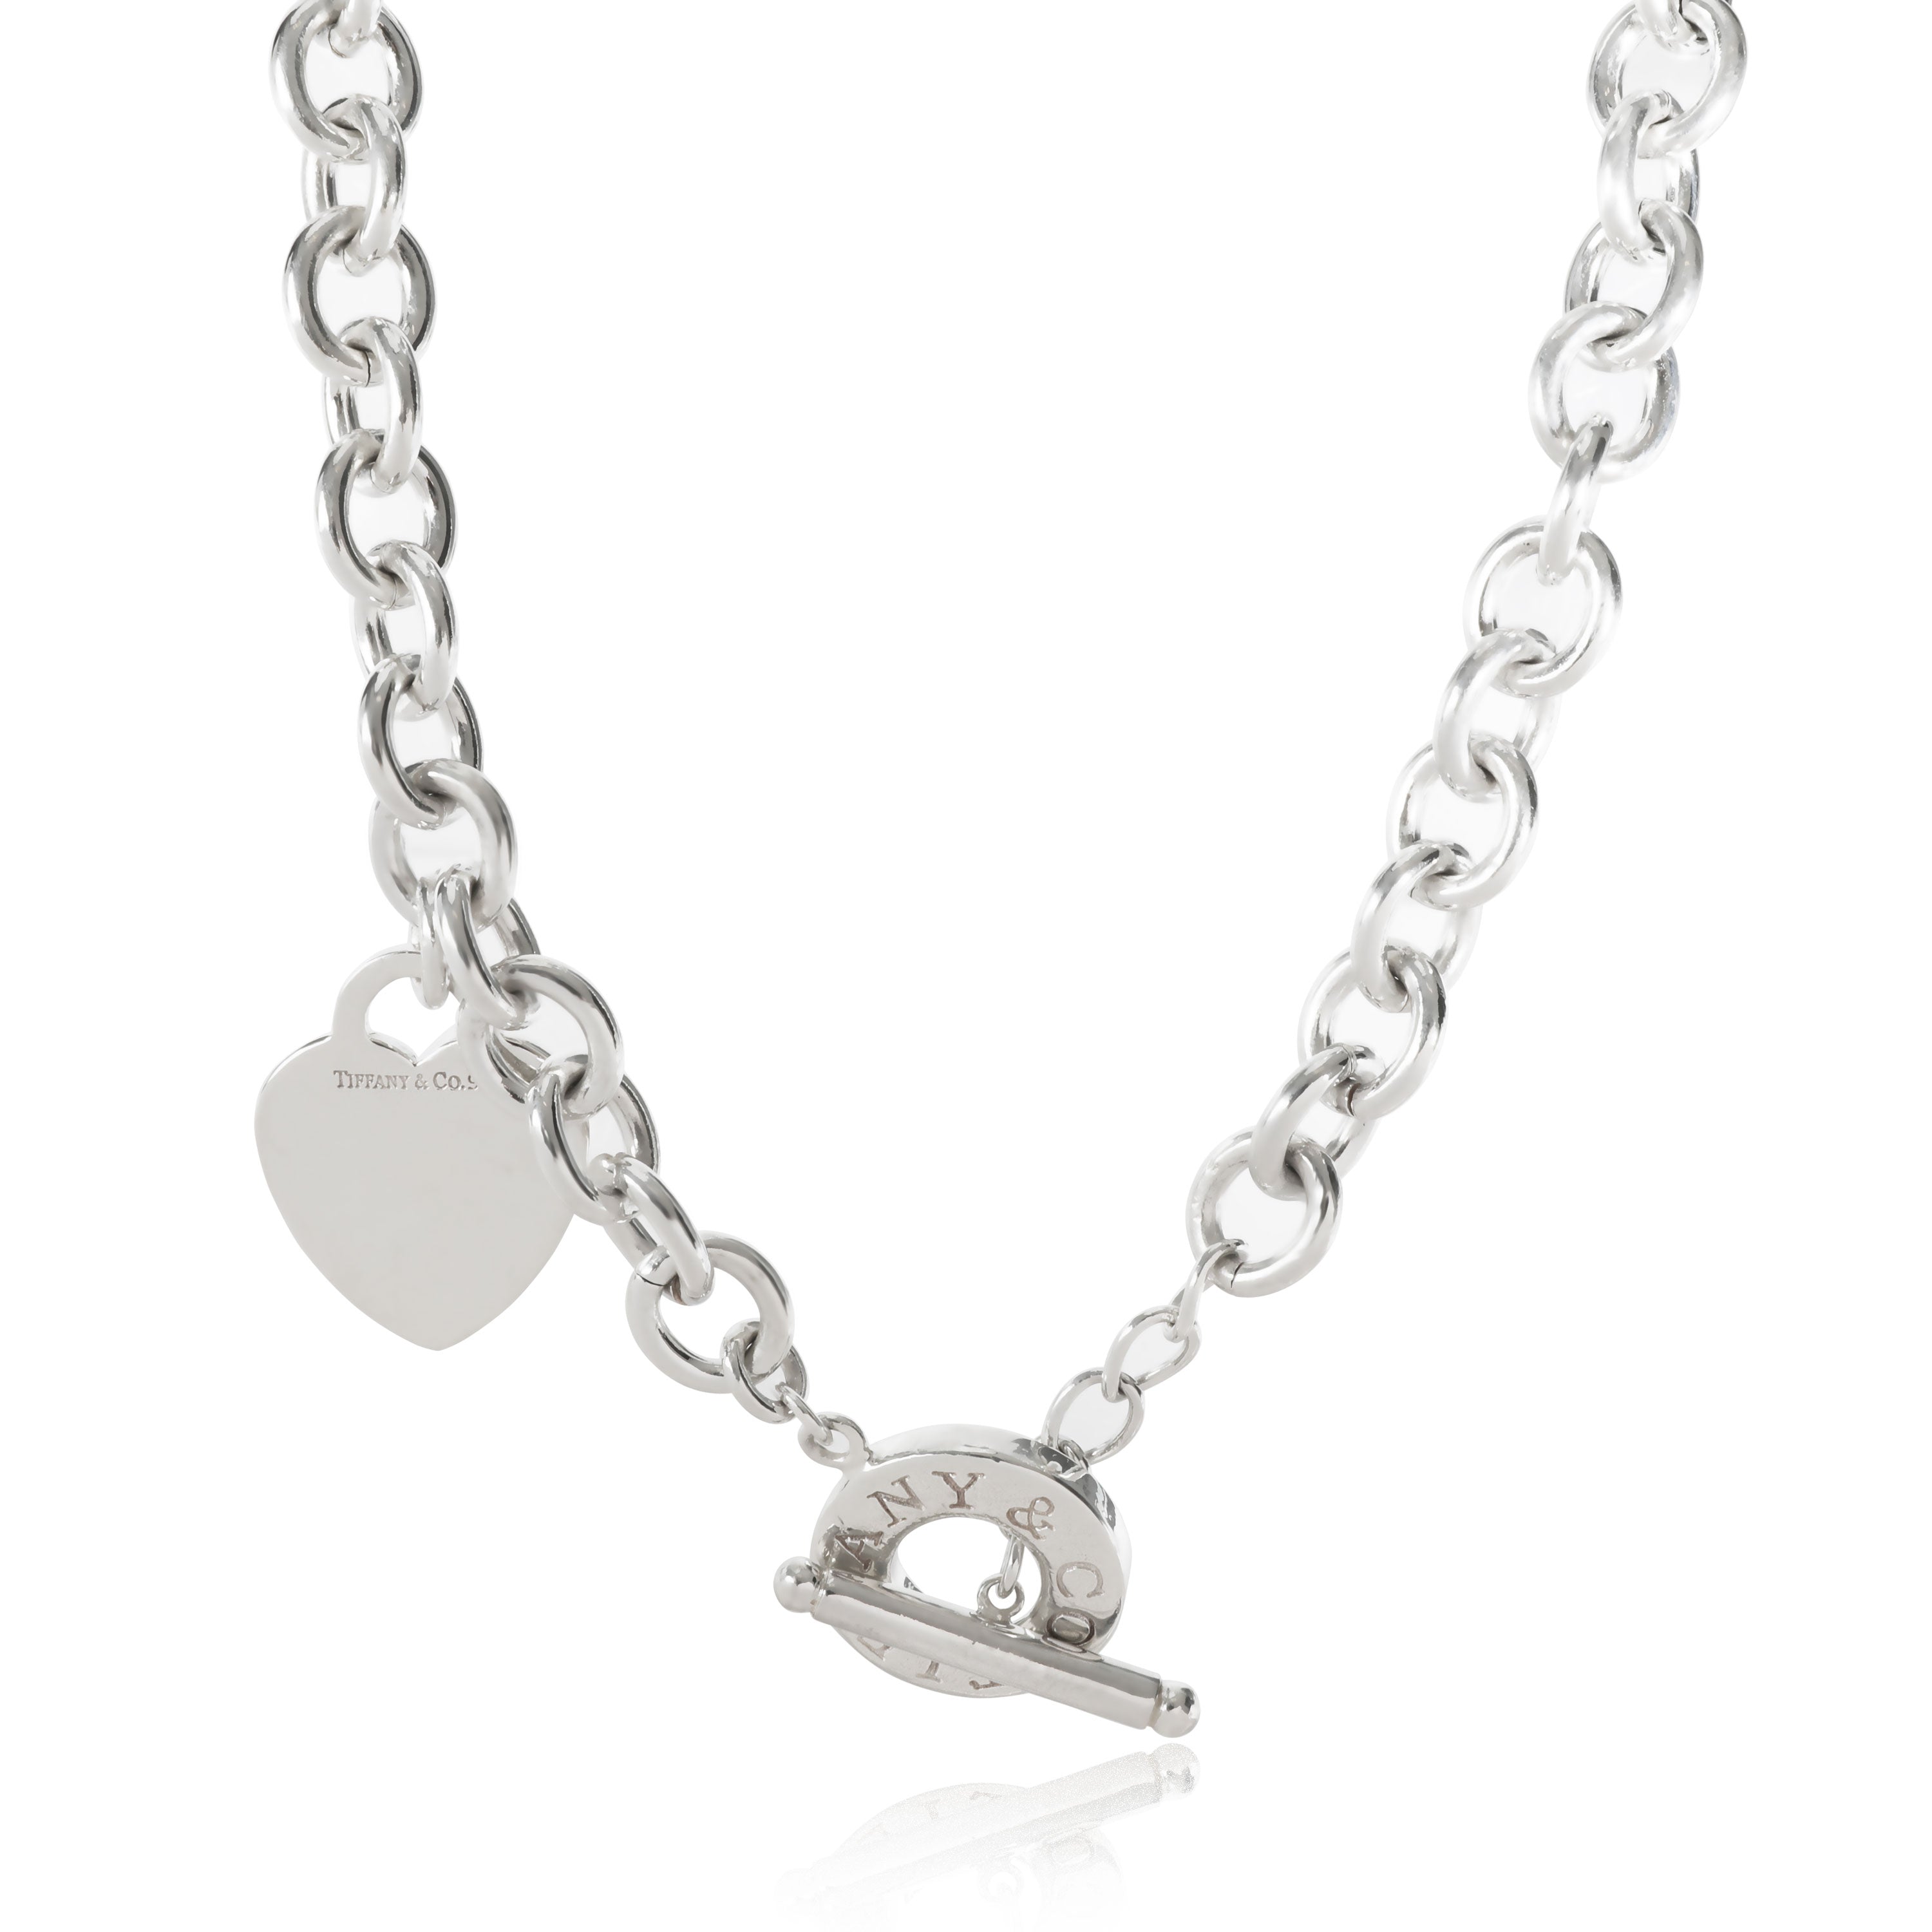 Auth Tiffany & Co. Heart Tag Toggle Necklace & Bracelet | #29088259